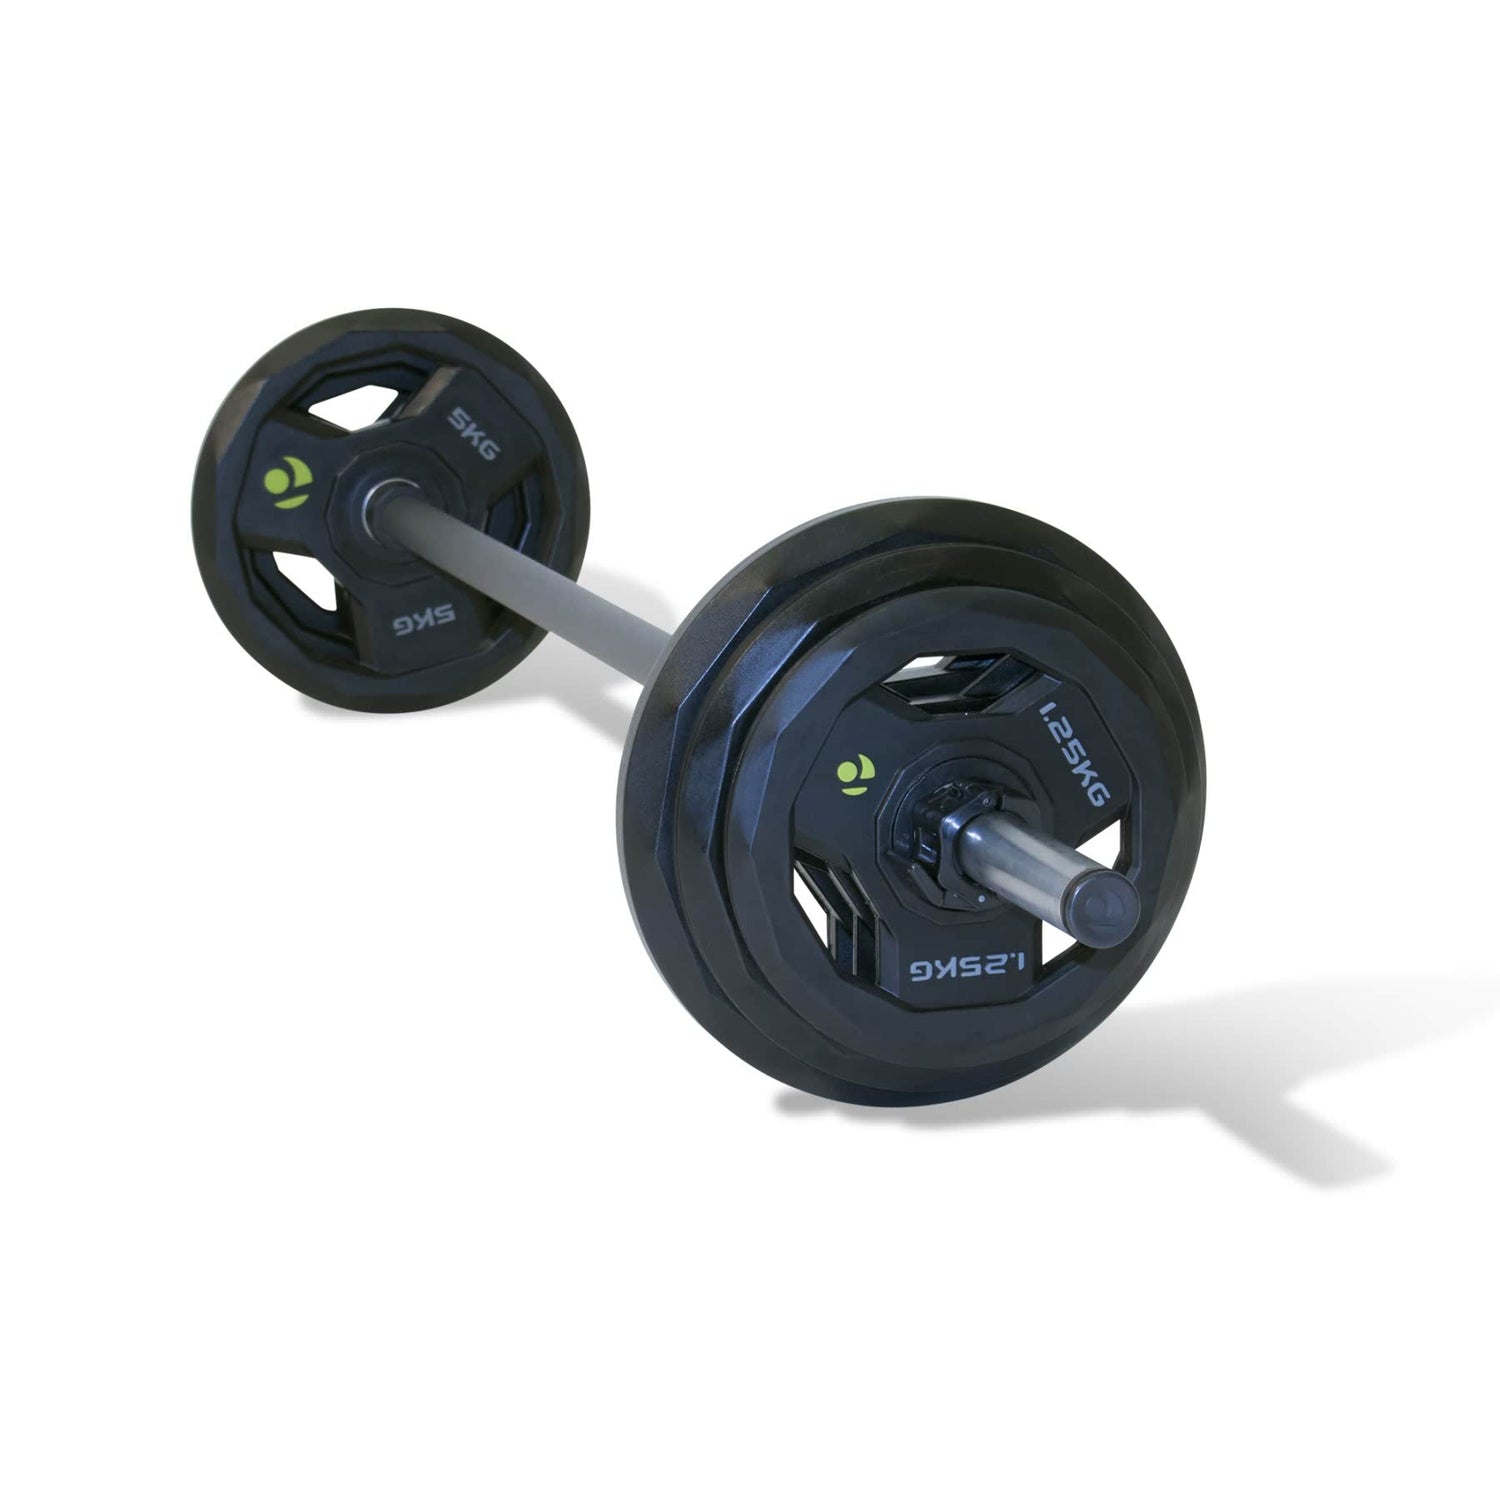 a black studio barbell set loaded with rubber weight discs